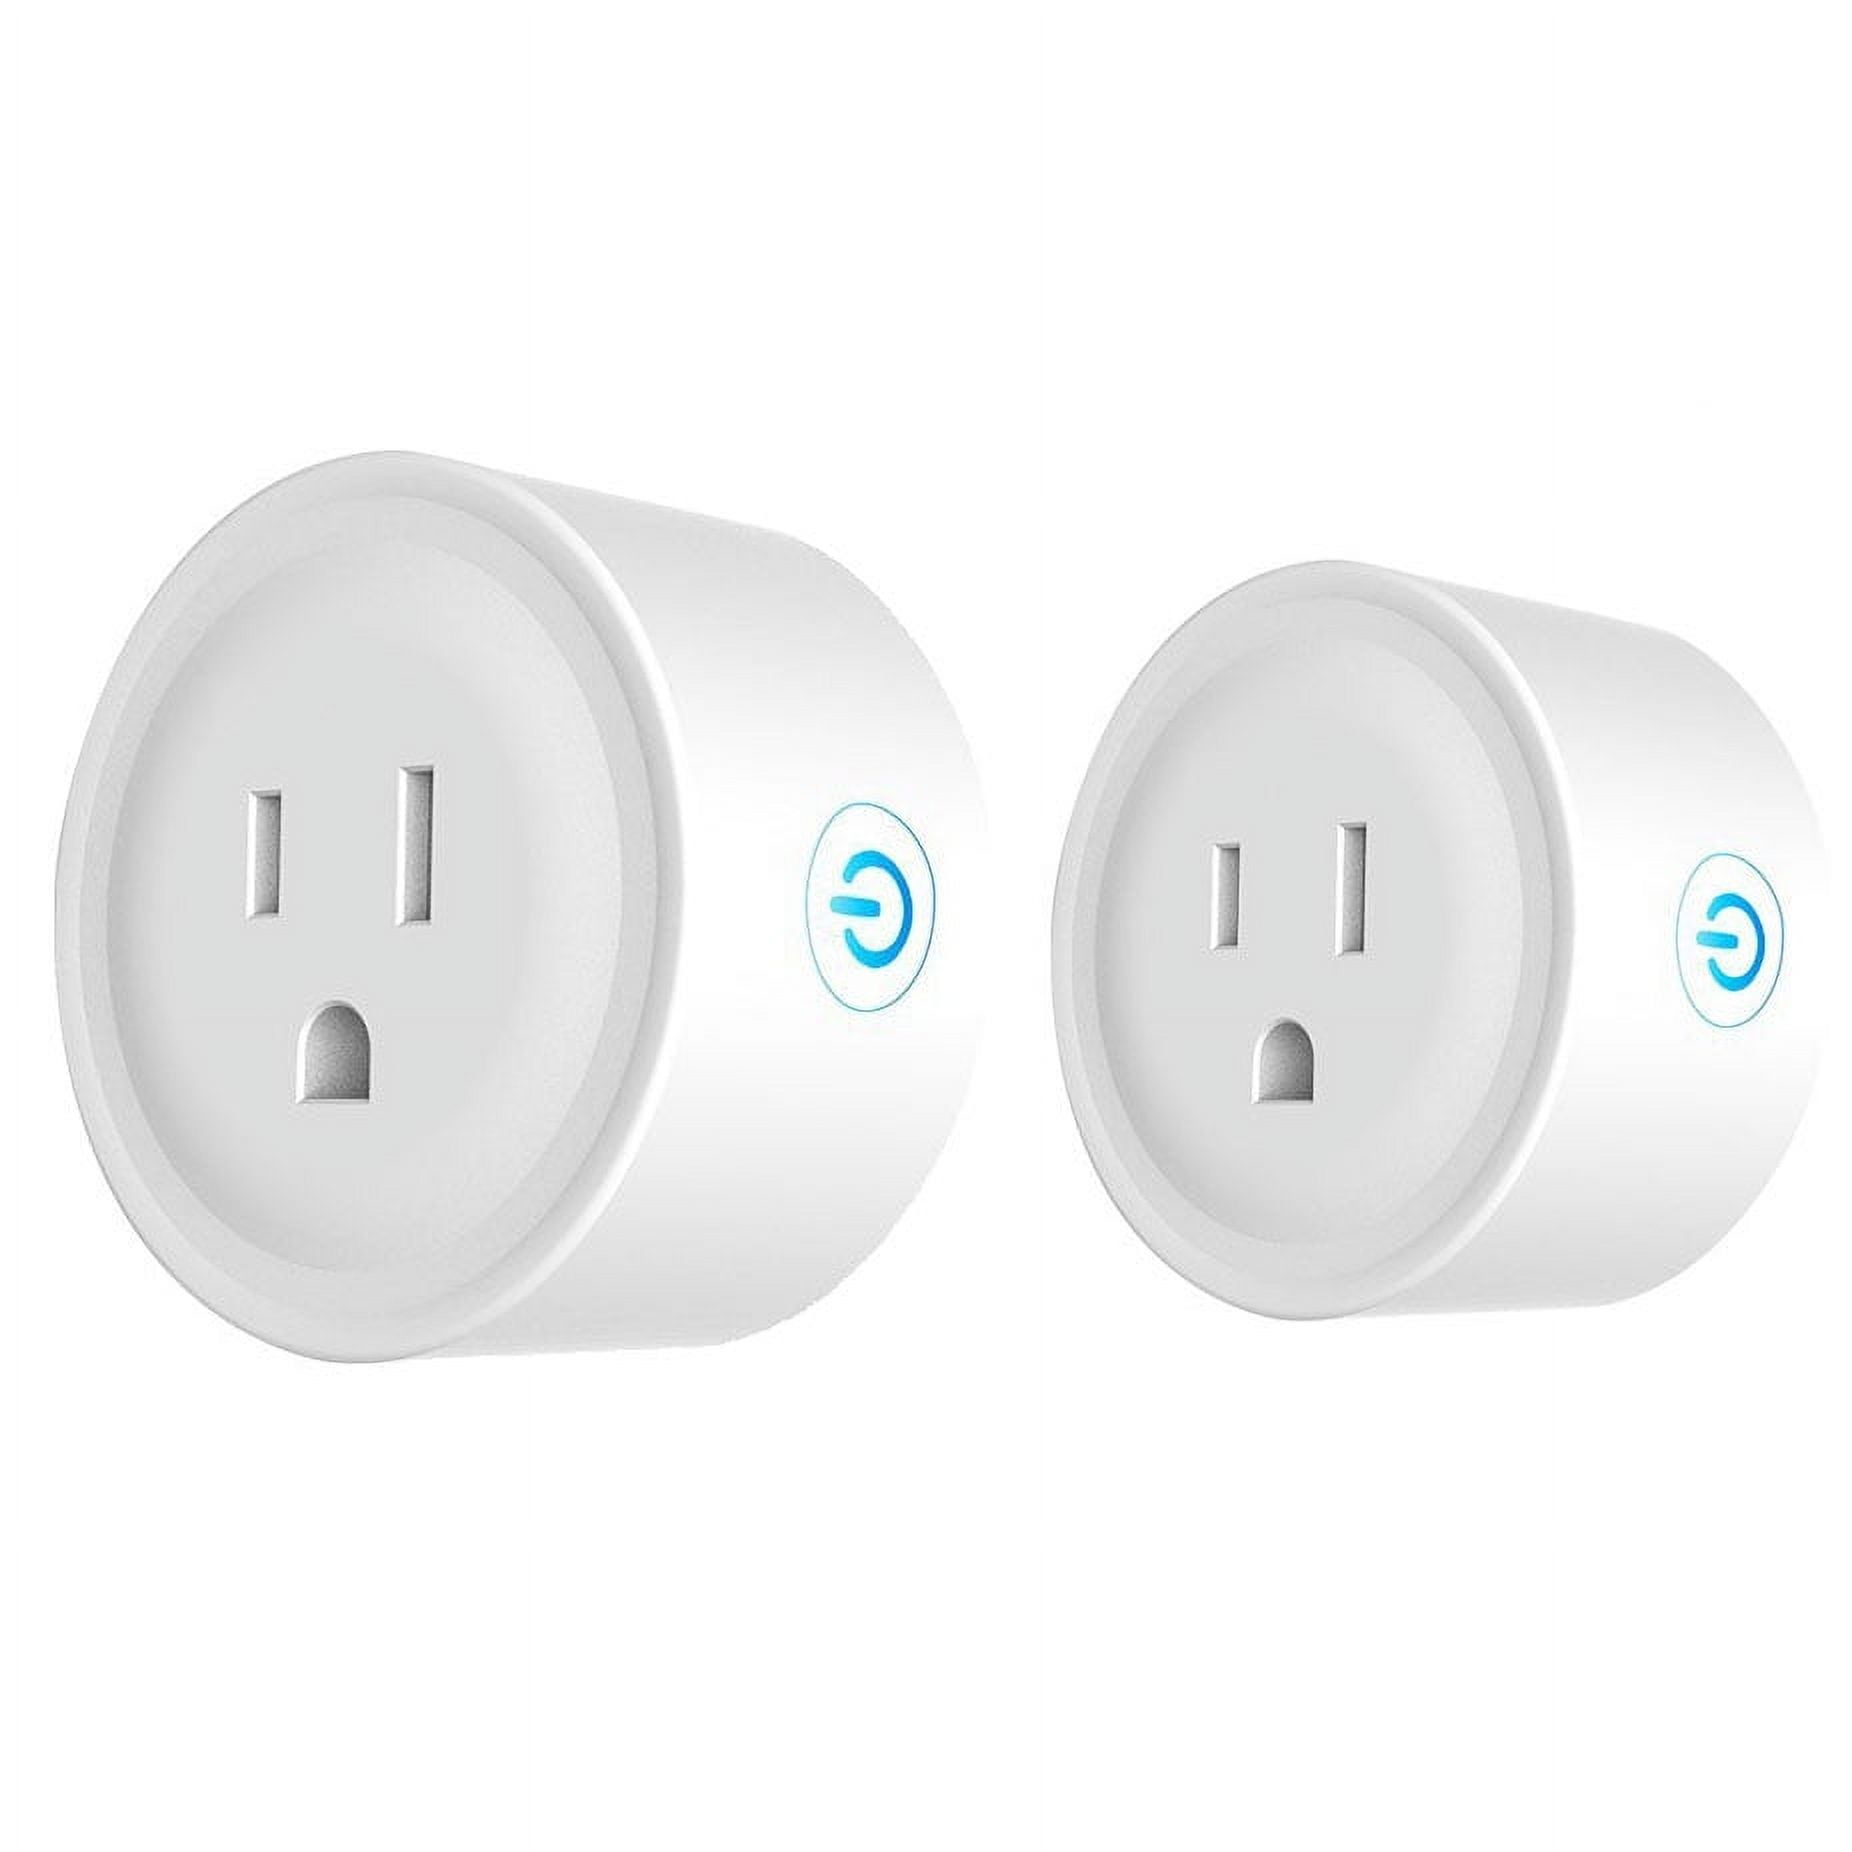 Deal Alert: 2-Pack Of WiFi Smart Plugs With Built-In USB Port For Just  $18.99 Today, $9.50 Apiece